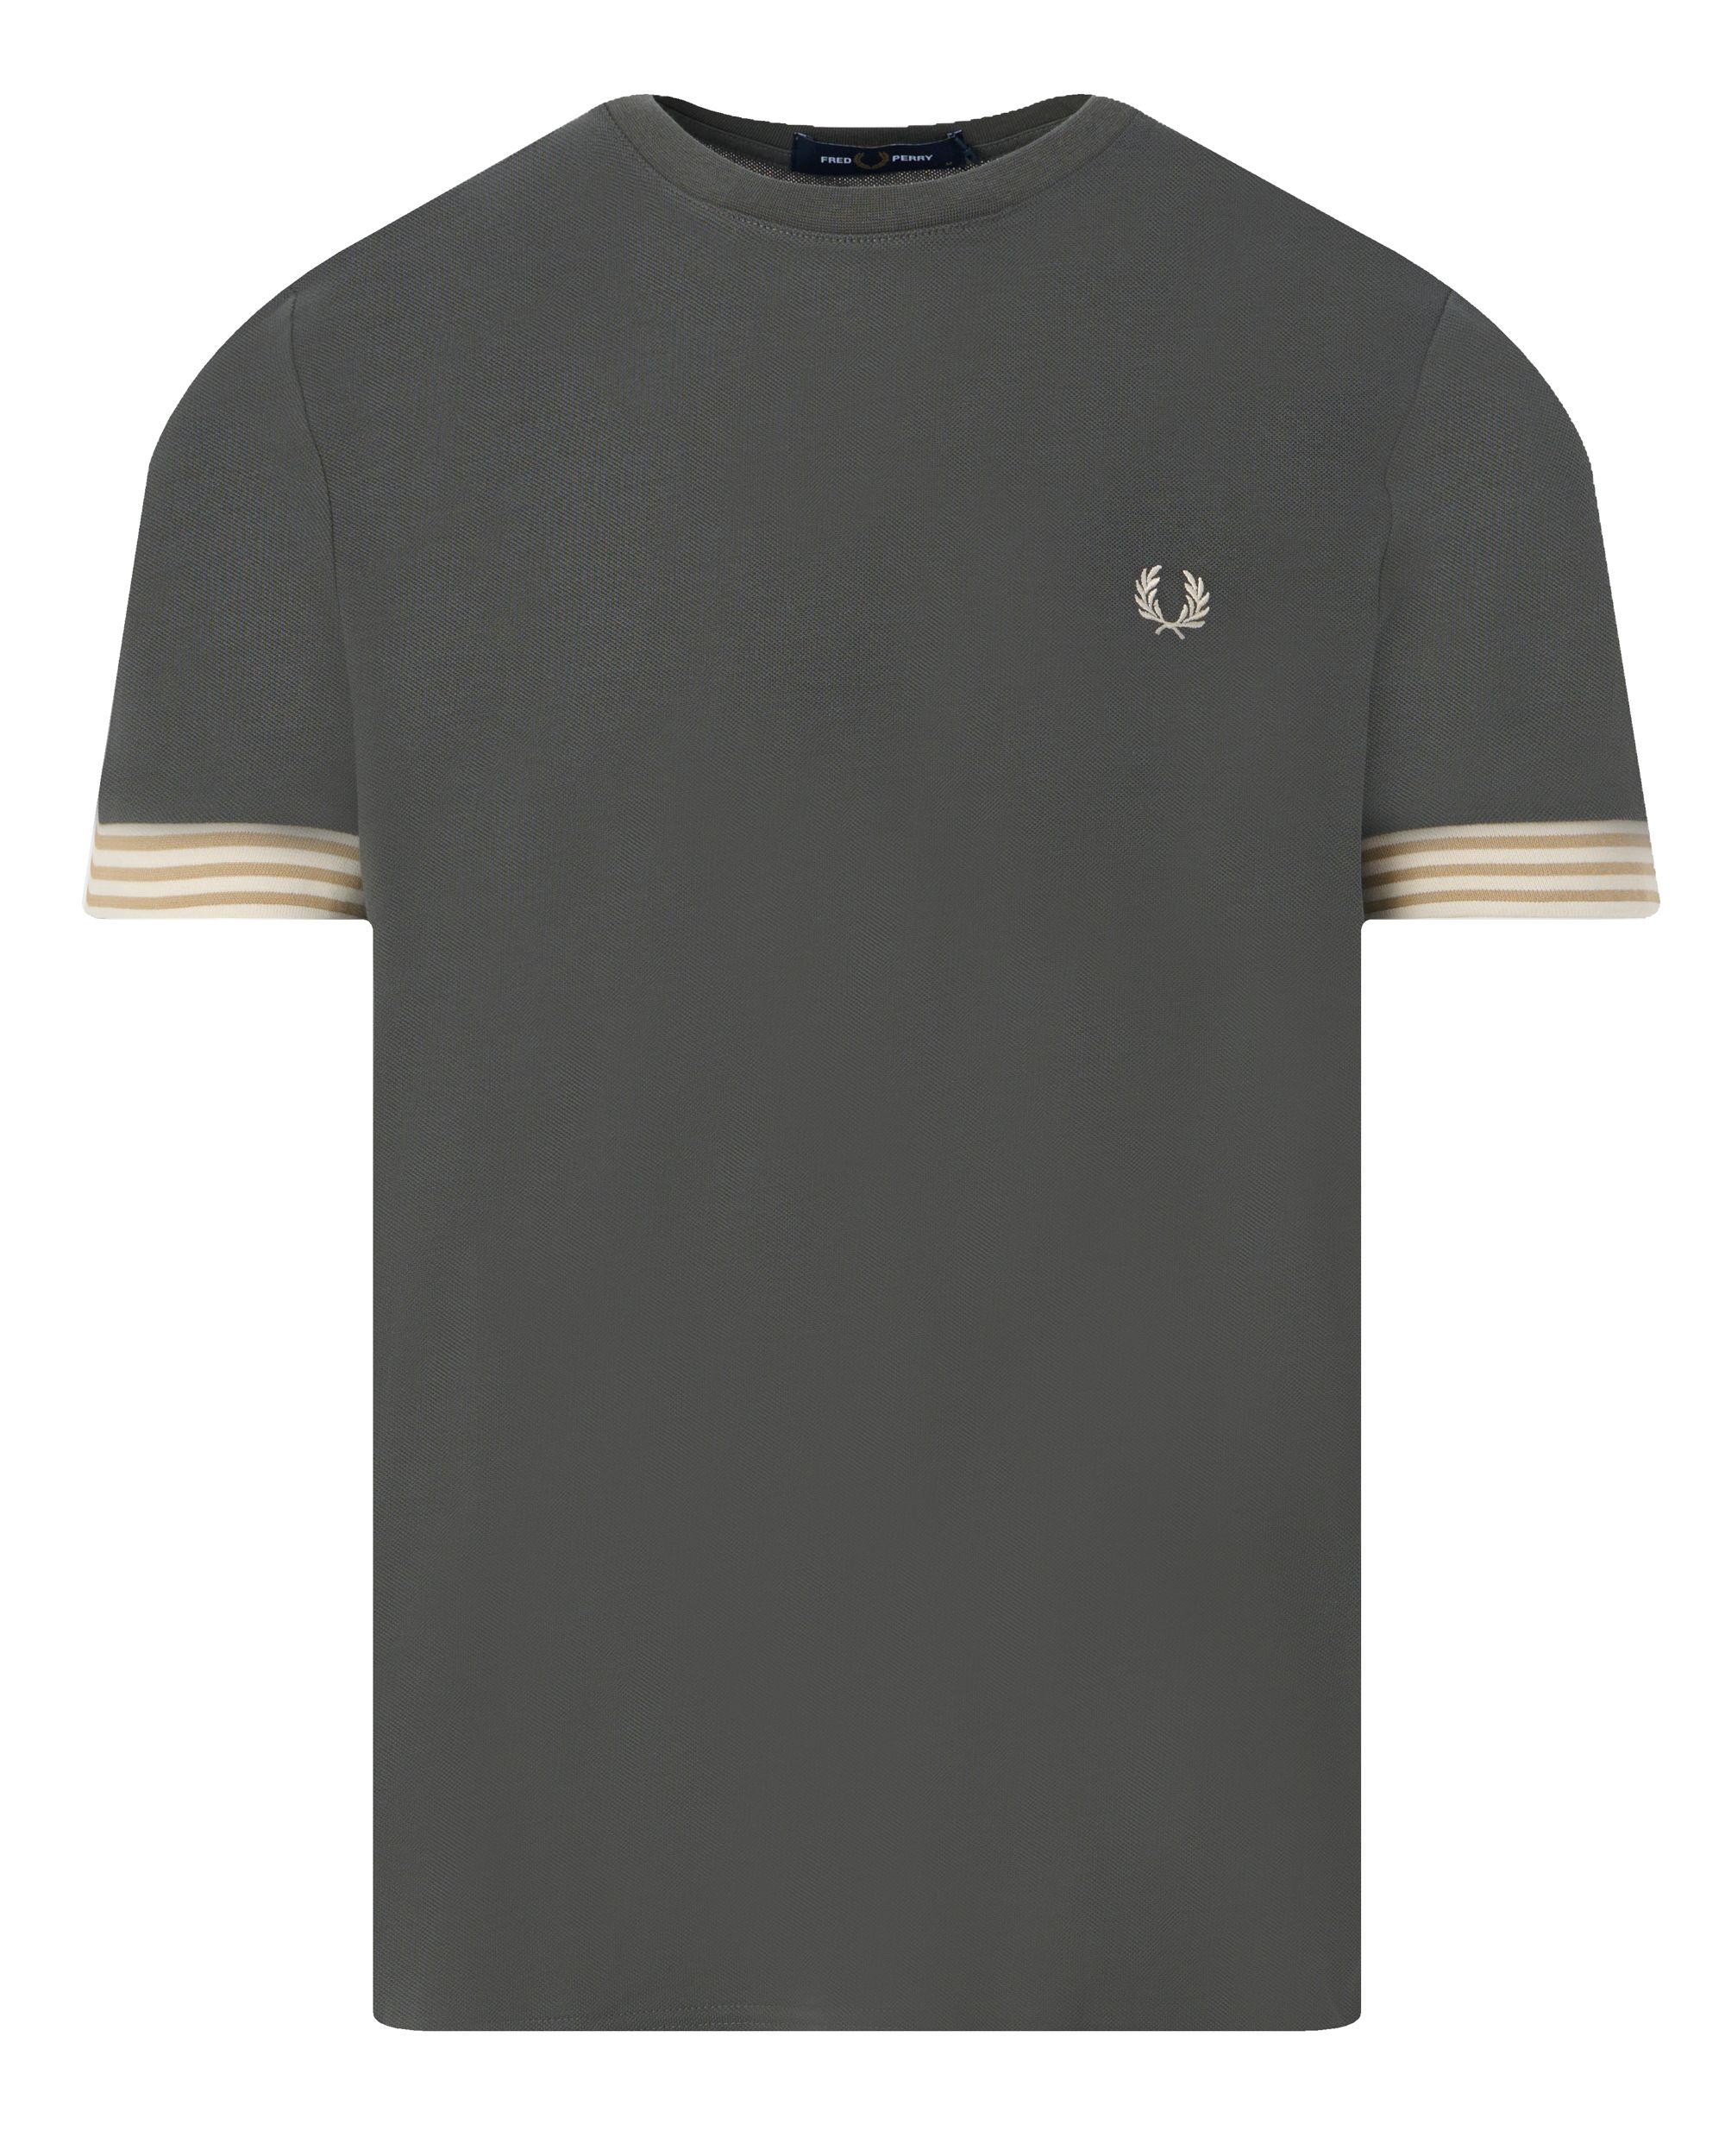 Fred Perry T-shirt KM Groen 091965-001-S